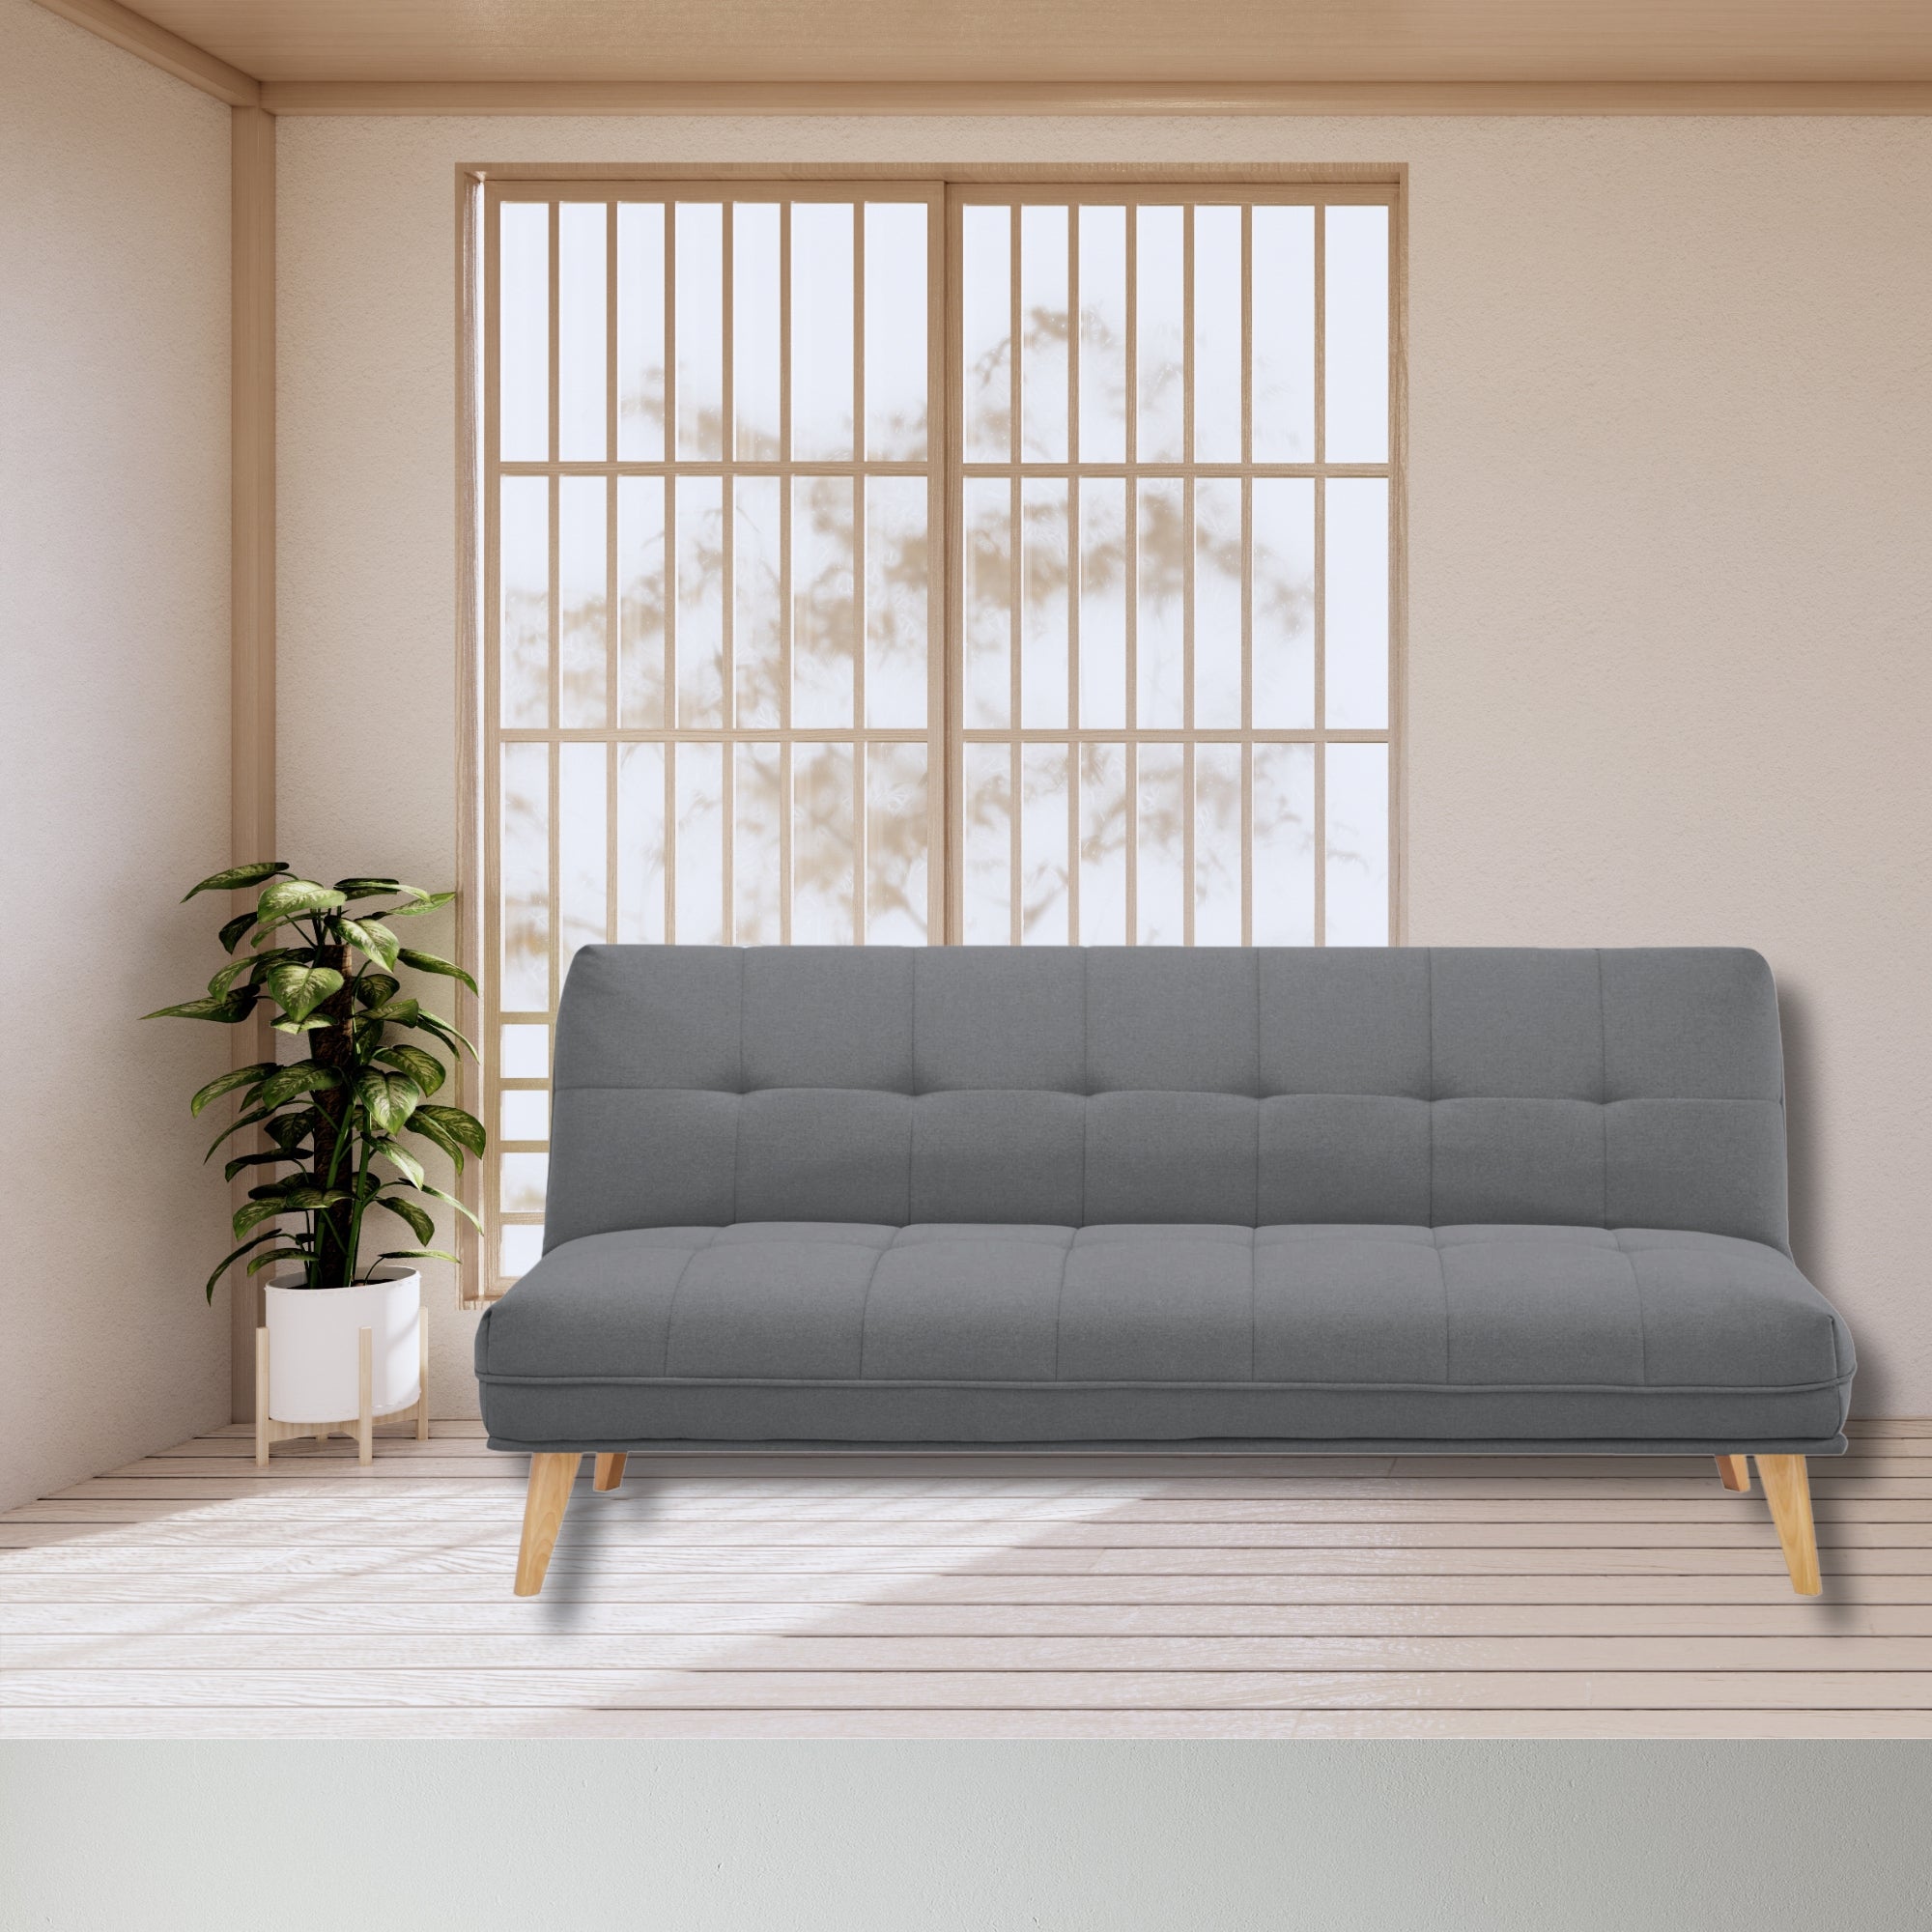 Mid Grey 3-Seater Sofa Bed with Wooden Legs, Scandinavian Style